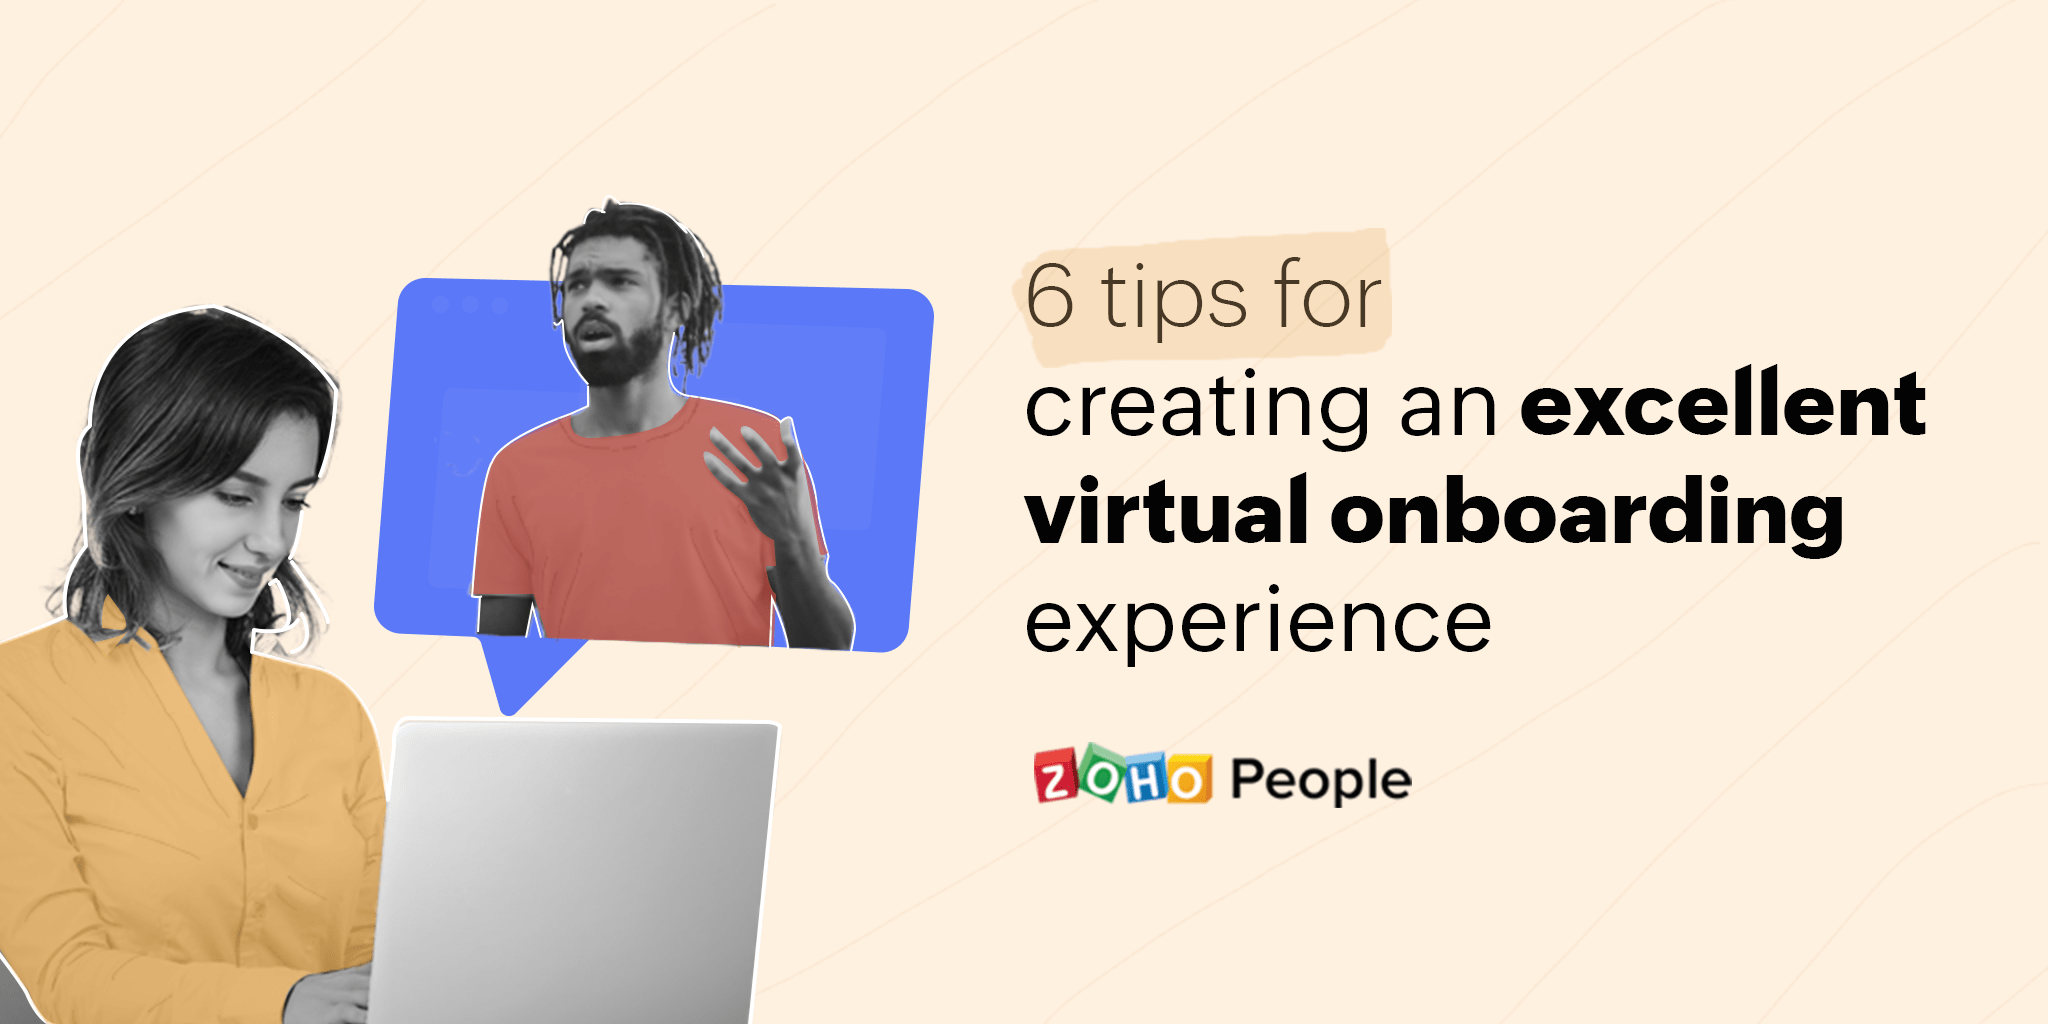 Top 6 tips for an effective virtual onboarding program